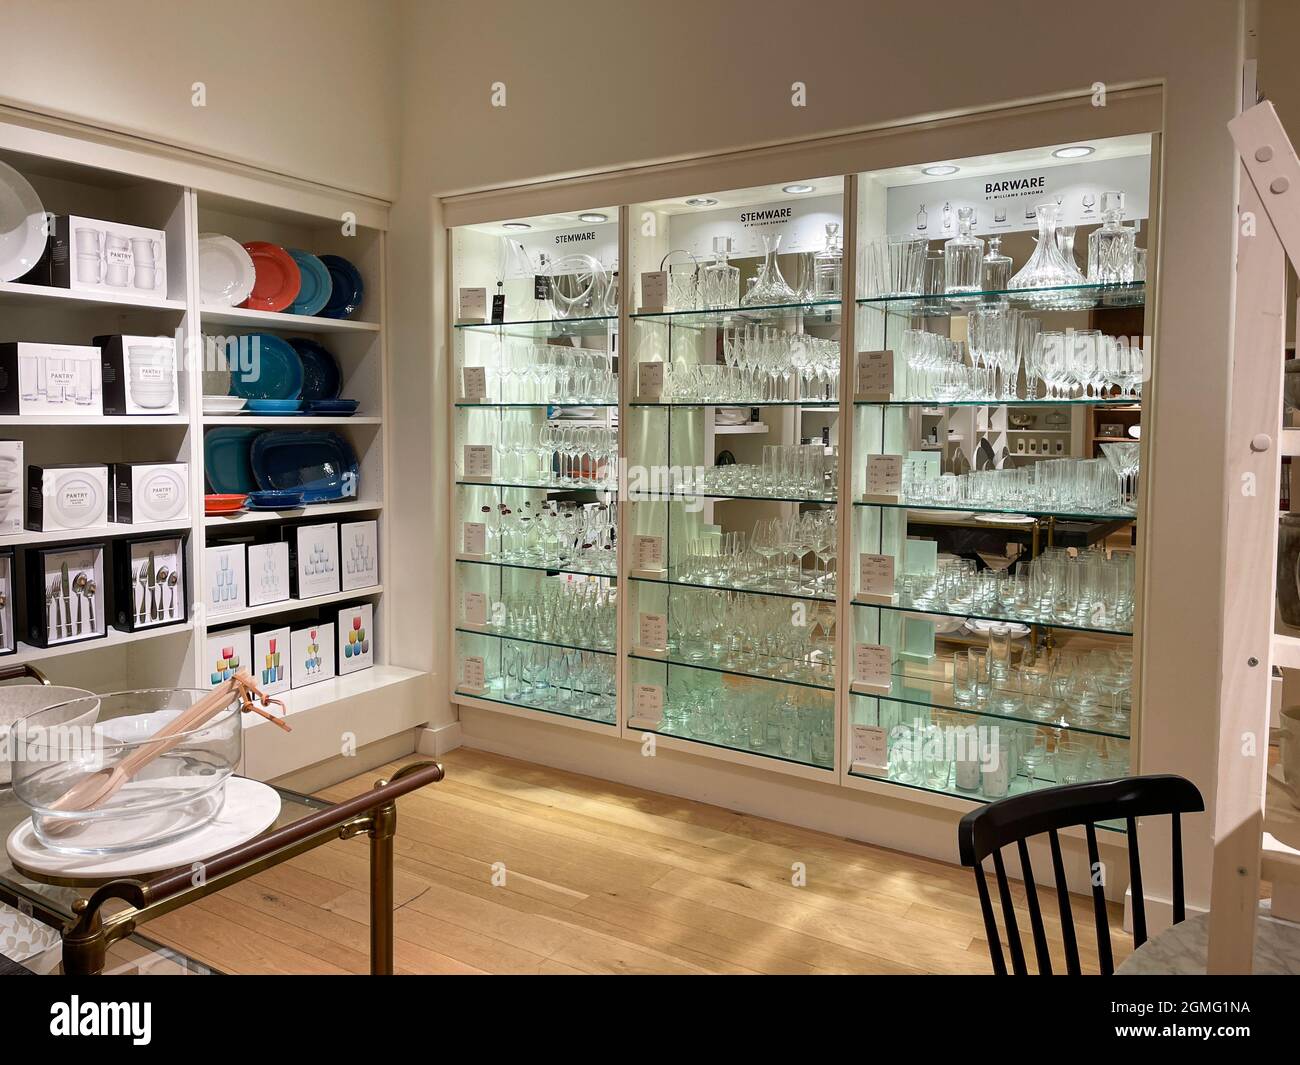 Orlando, FL USA -  September 9, 2021: A display with stemware and barware glasses at a Williams Sonoma store at an indoor mall in Orlando, Florida. Stock Photo